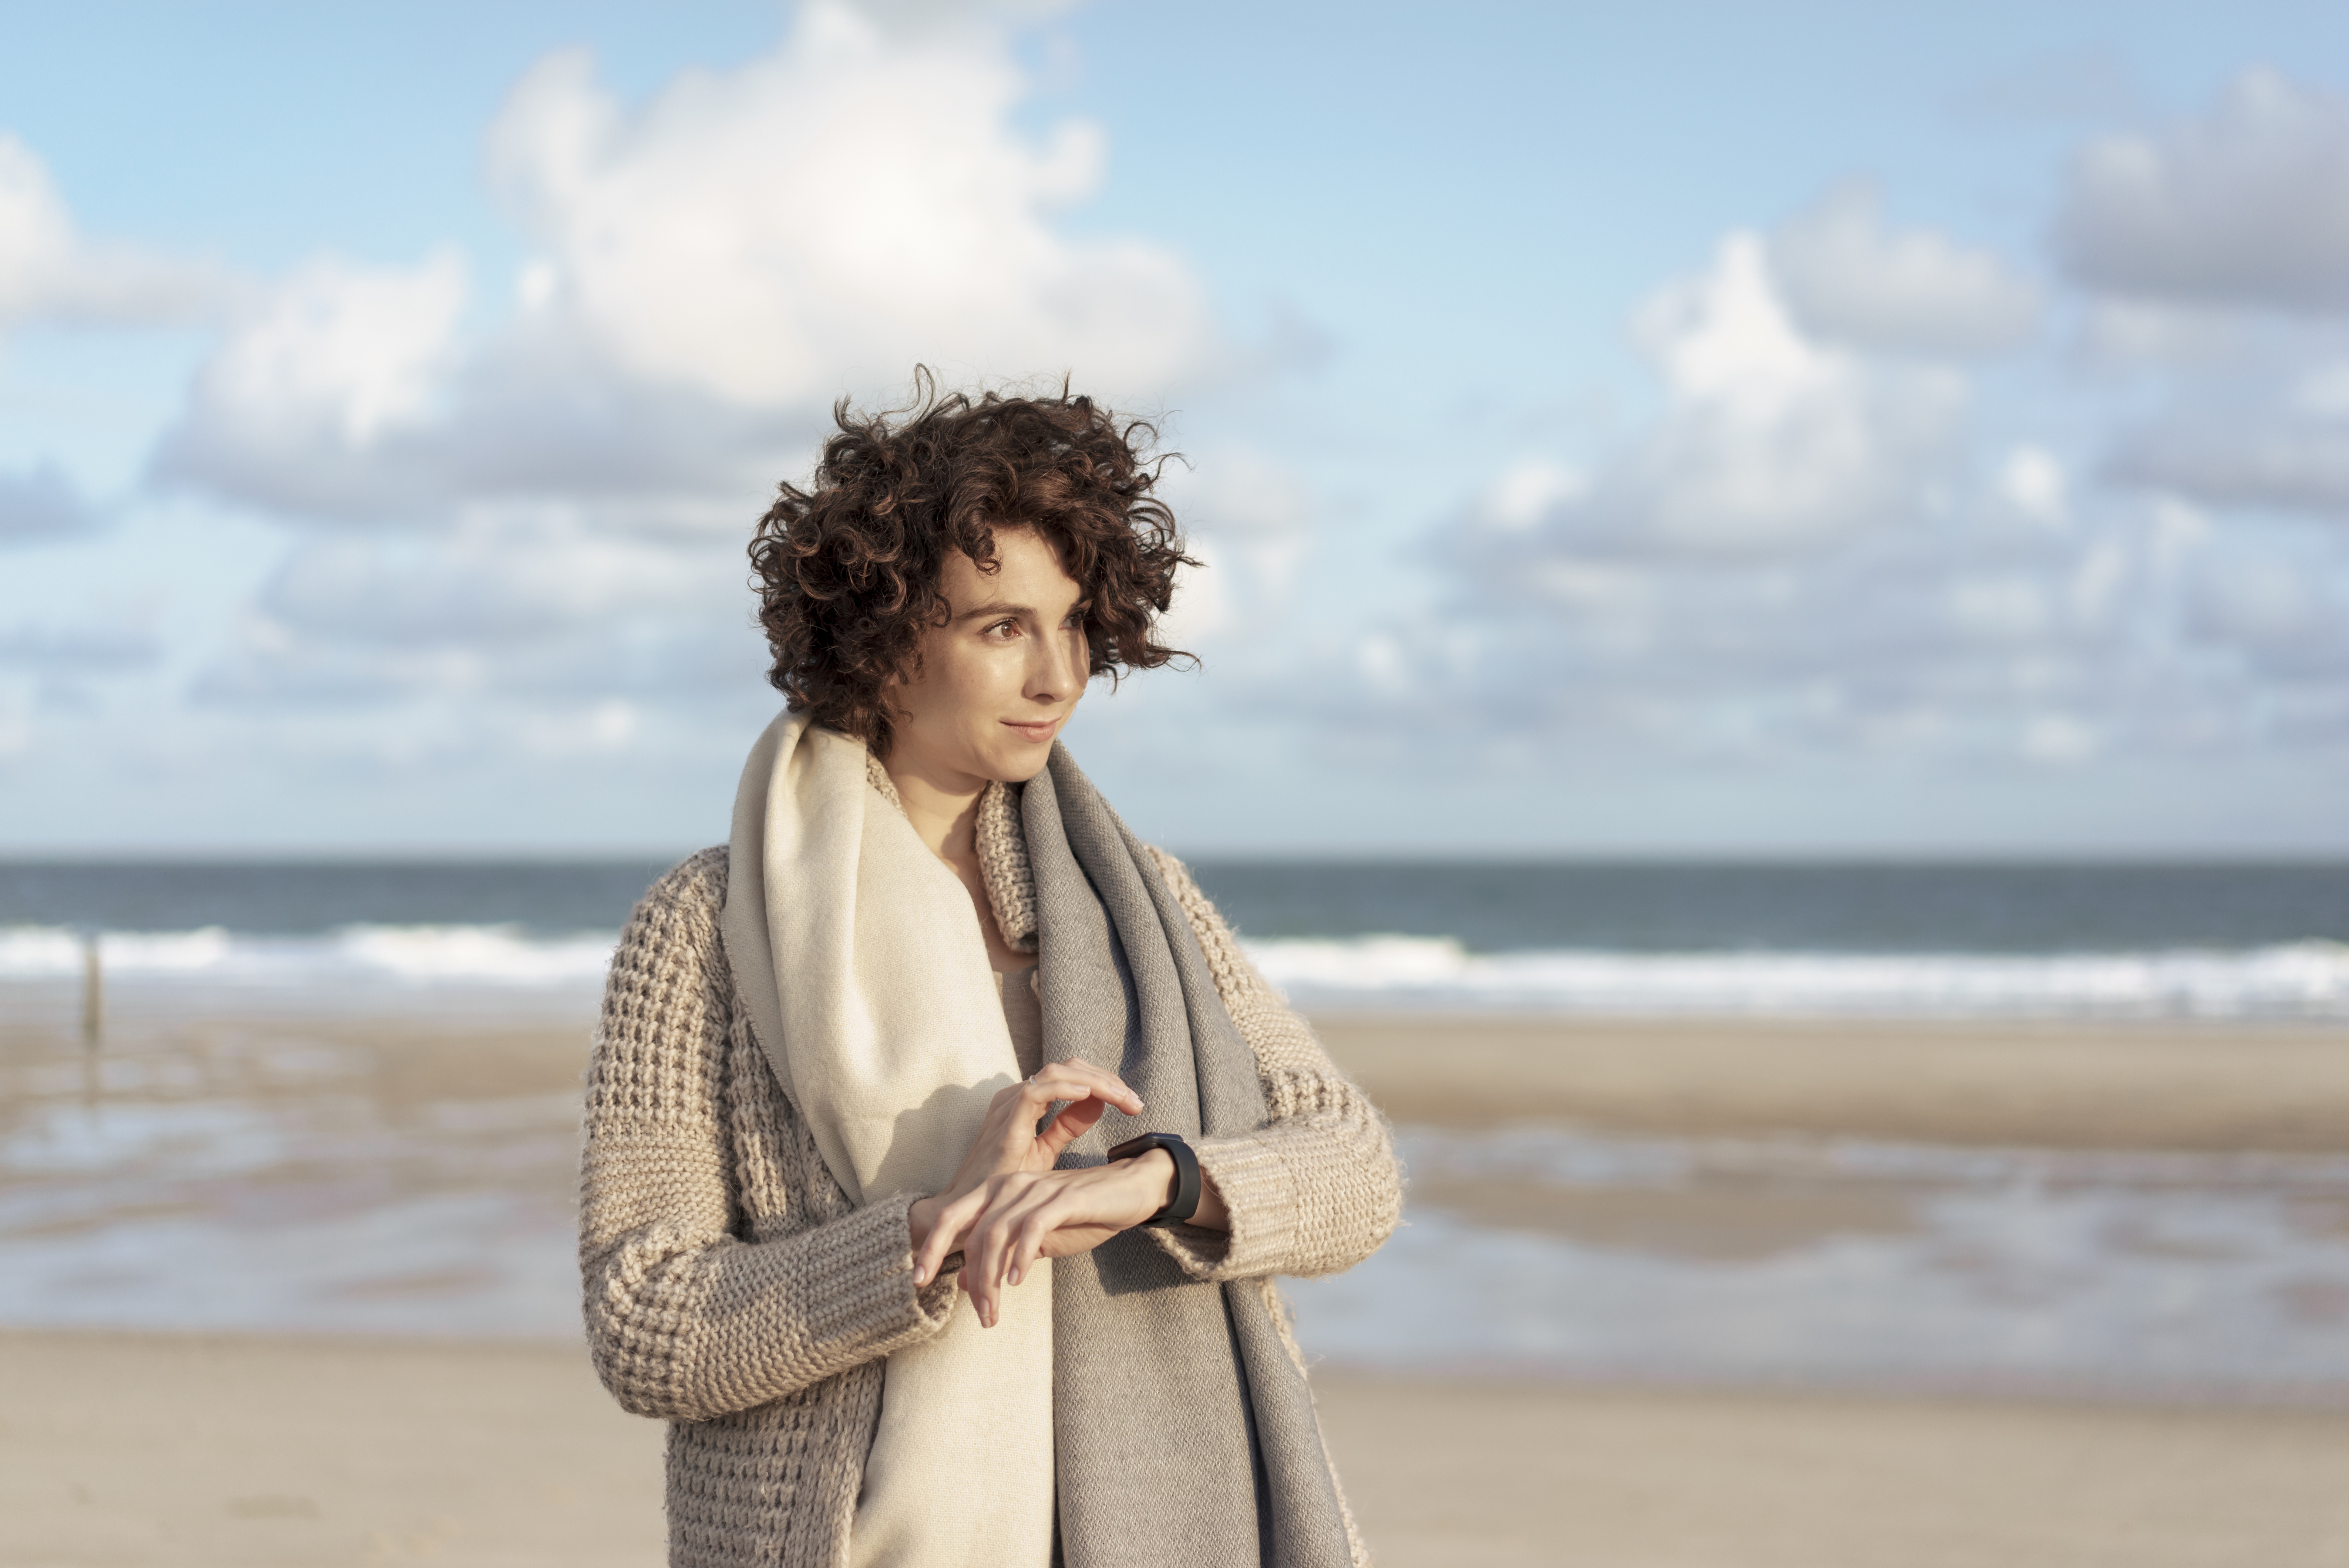 Person standing on the beach wearing a sweater and a scarf, with a contemplative look